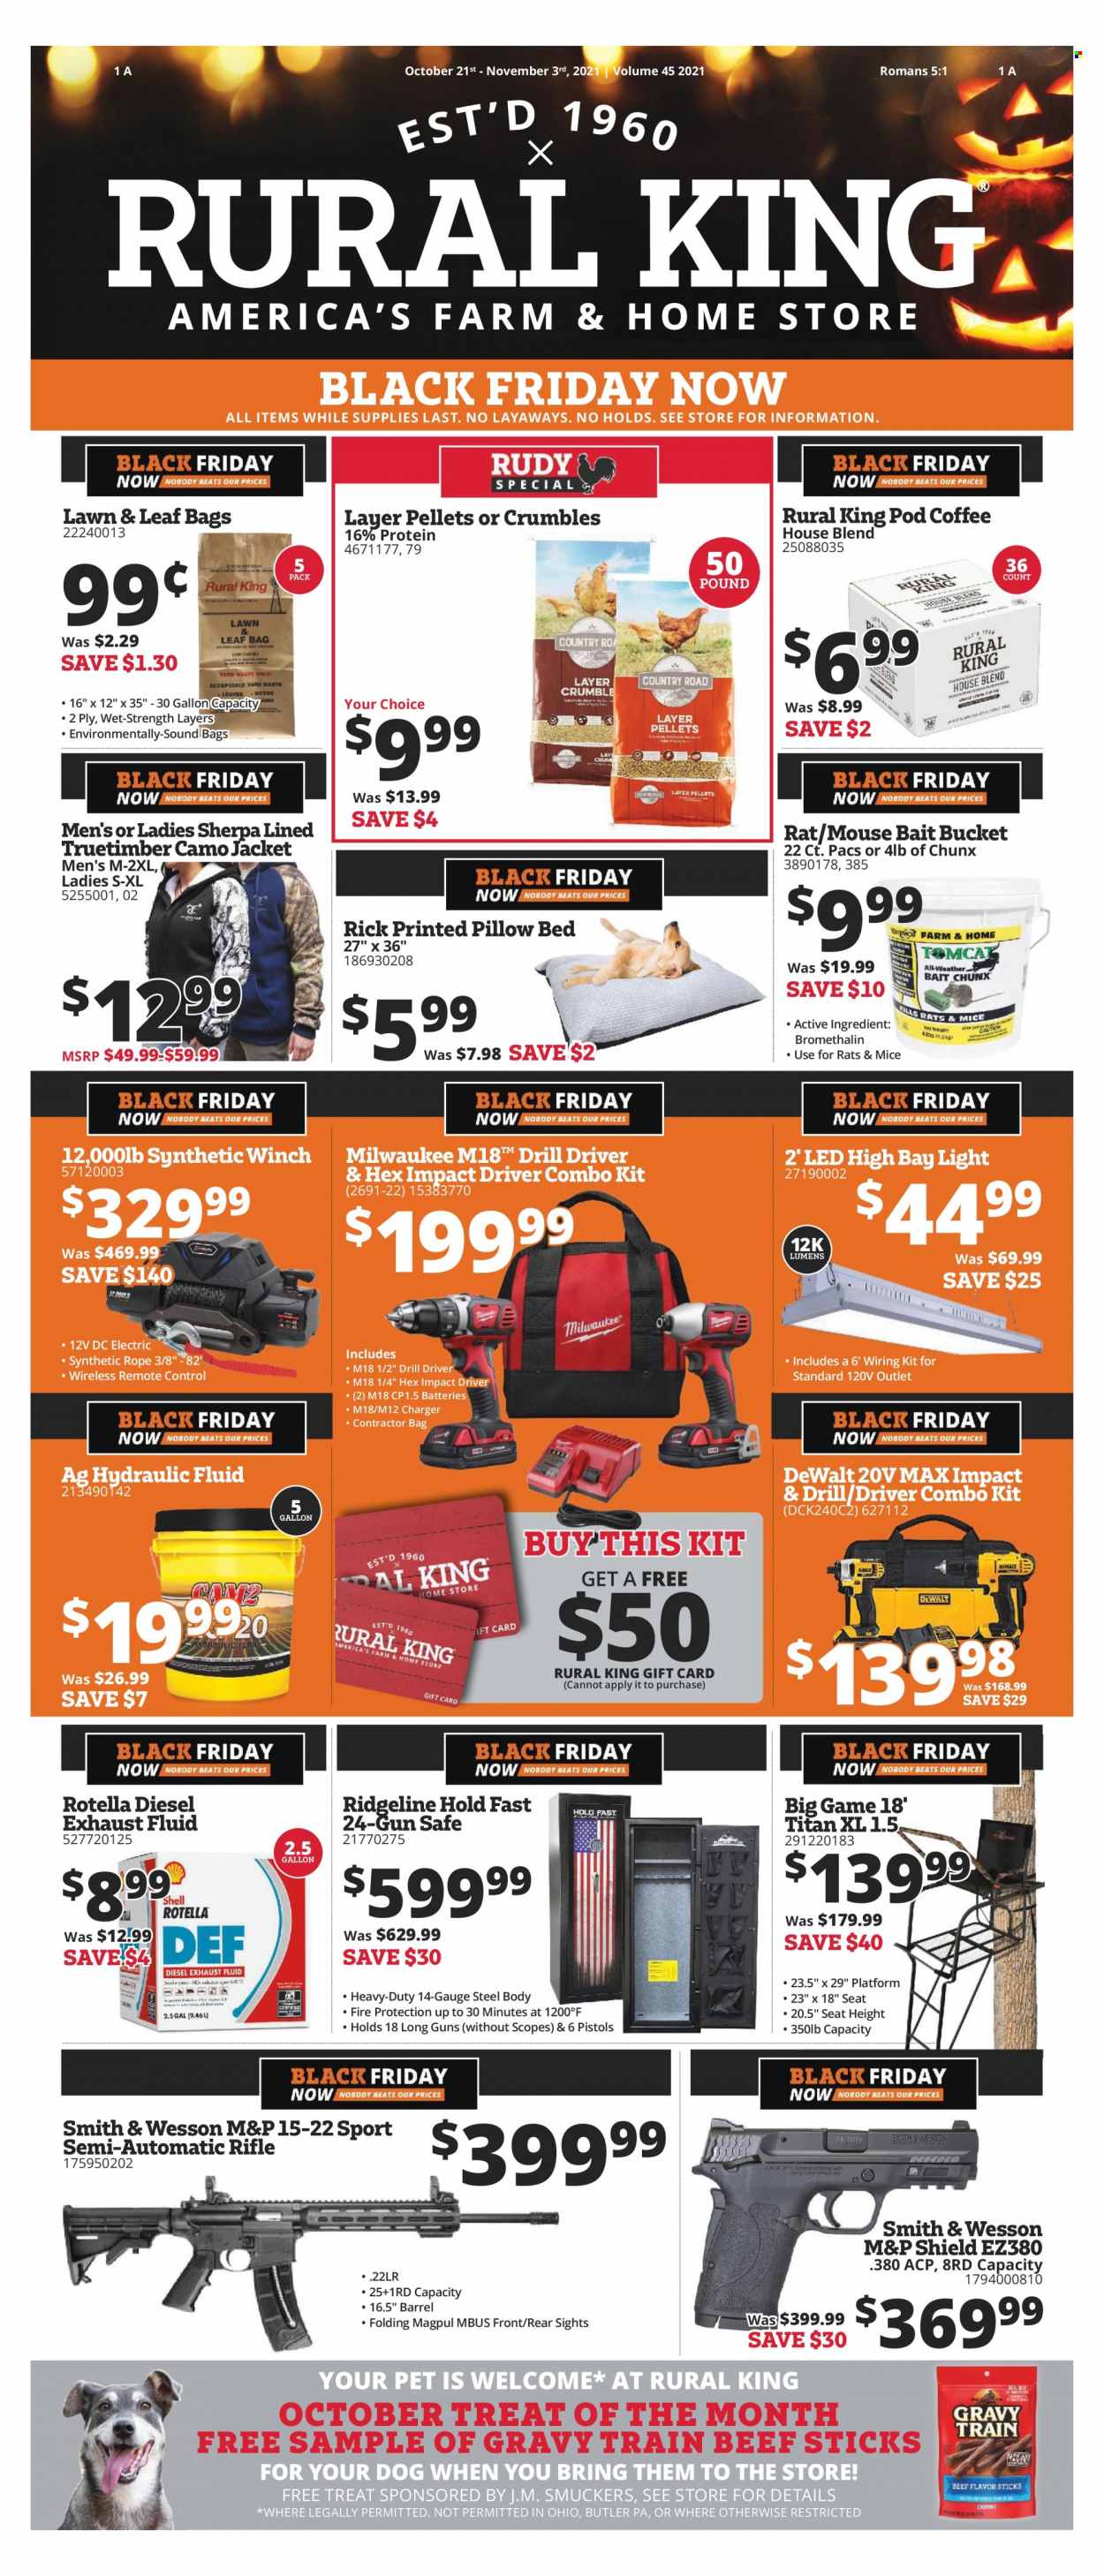 thumbnail - Rural King Flyer - 10/21/2021 - 11/03/2021 - Sales products - DeWALT, coffee, bag, gallon, pillow, mouse, remote control, jacket, sherpa, rifle, semi-automatic rifle, Magpul, Milwaukee, drill, impact driver, combo kit, gun safe, wiring kit, Rotella, hydraulic fluids, exhaust fluid. Page 1.